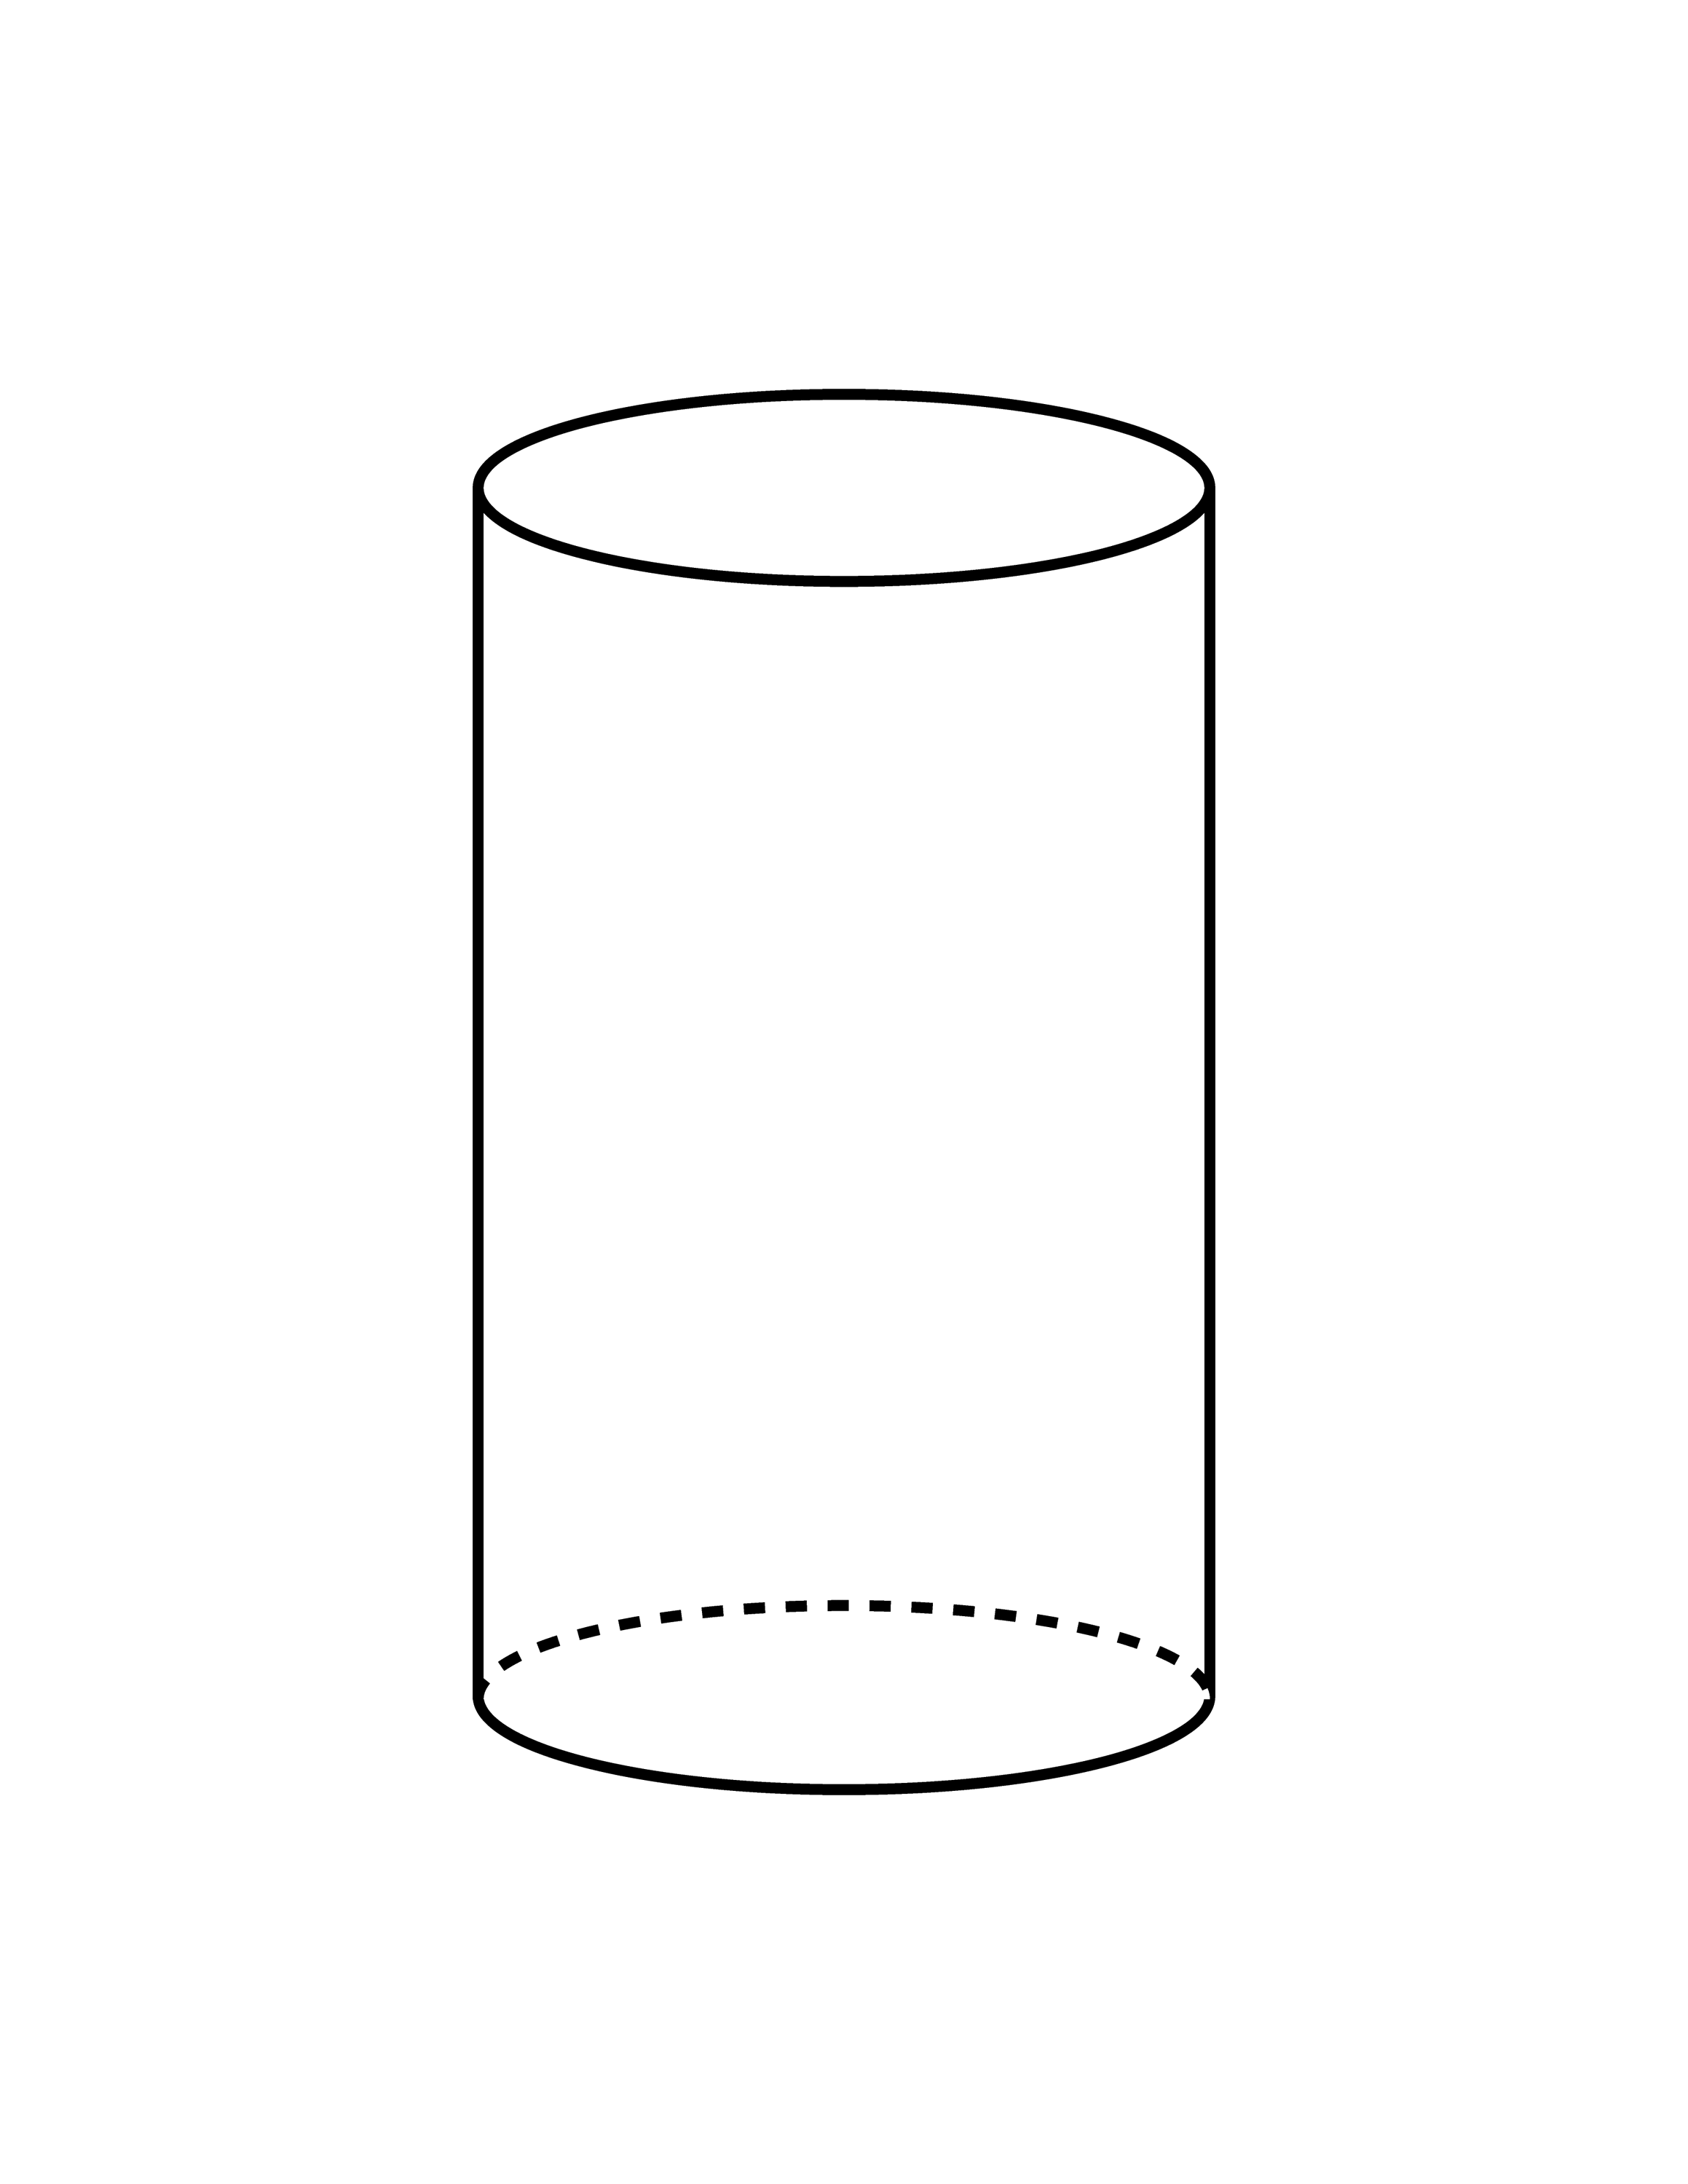 Flashcard of a Cylinder ClipArt ETC